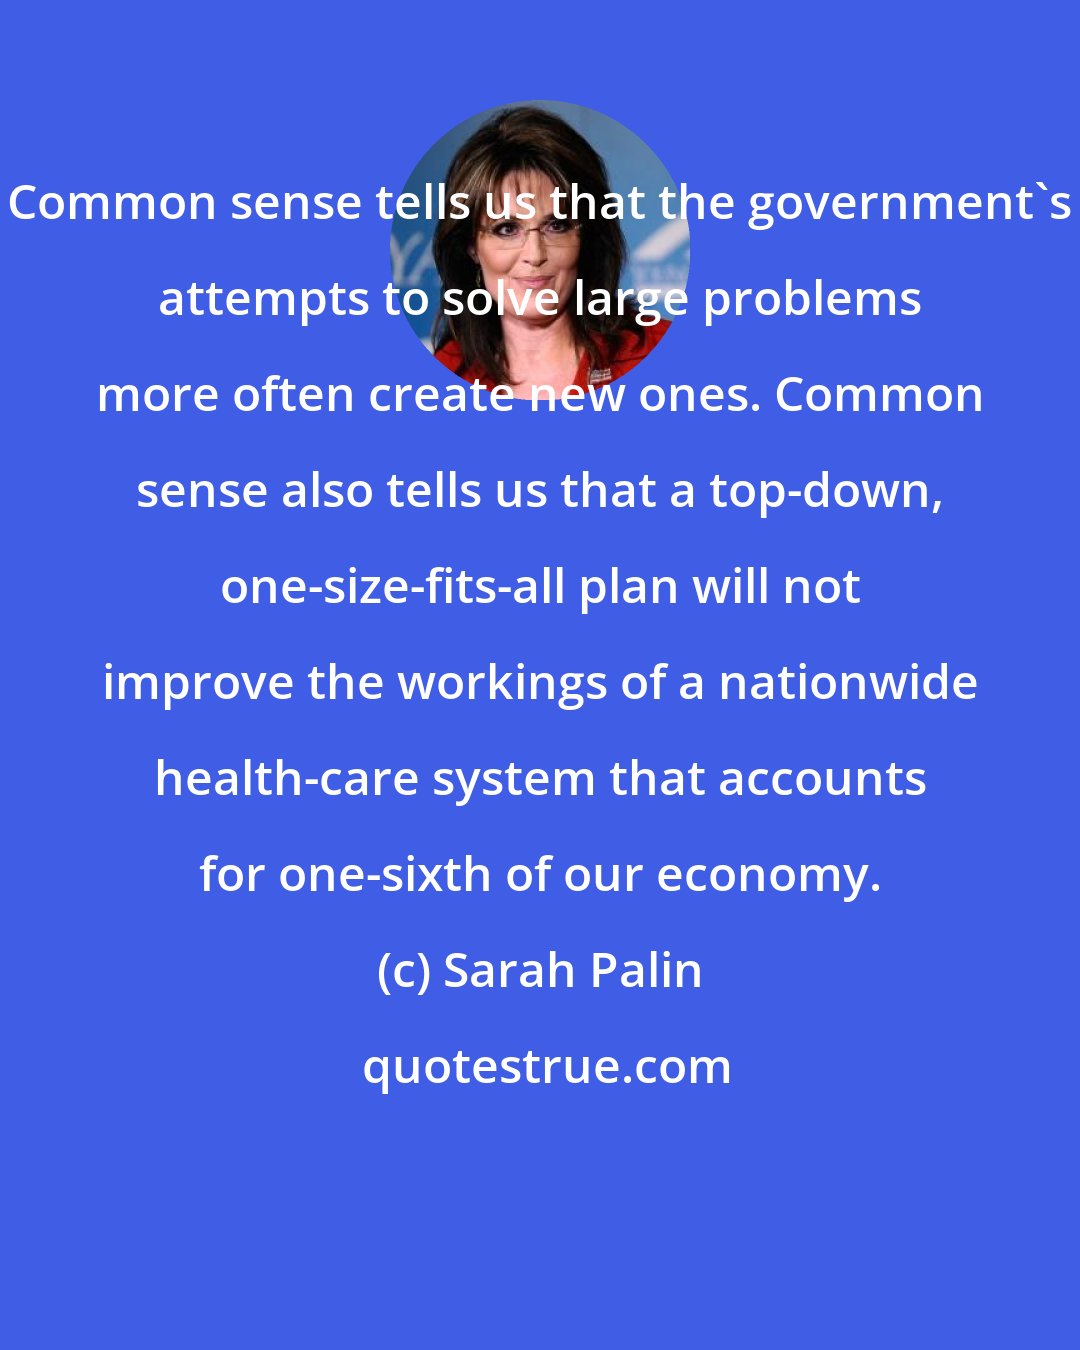 Sarah Palin: Common sense tells us that the government's attempts to solve large problems more often create new ones. Common sense also tells us that a top-down, one-size-fits-all plan will not improve the workings of a nationwide health-care system that accounts for one-sixth of our economy.